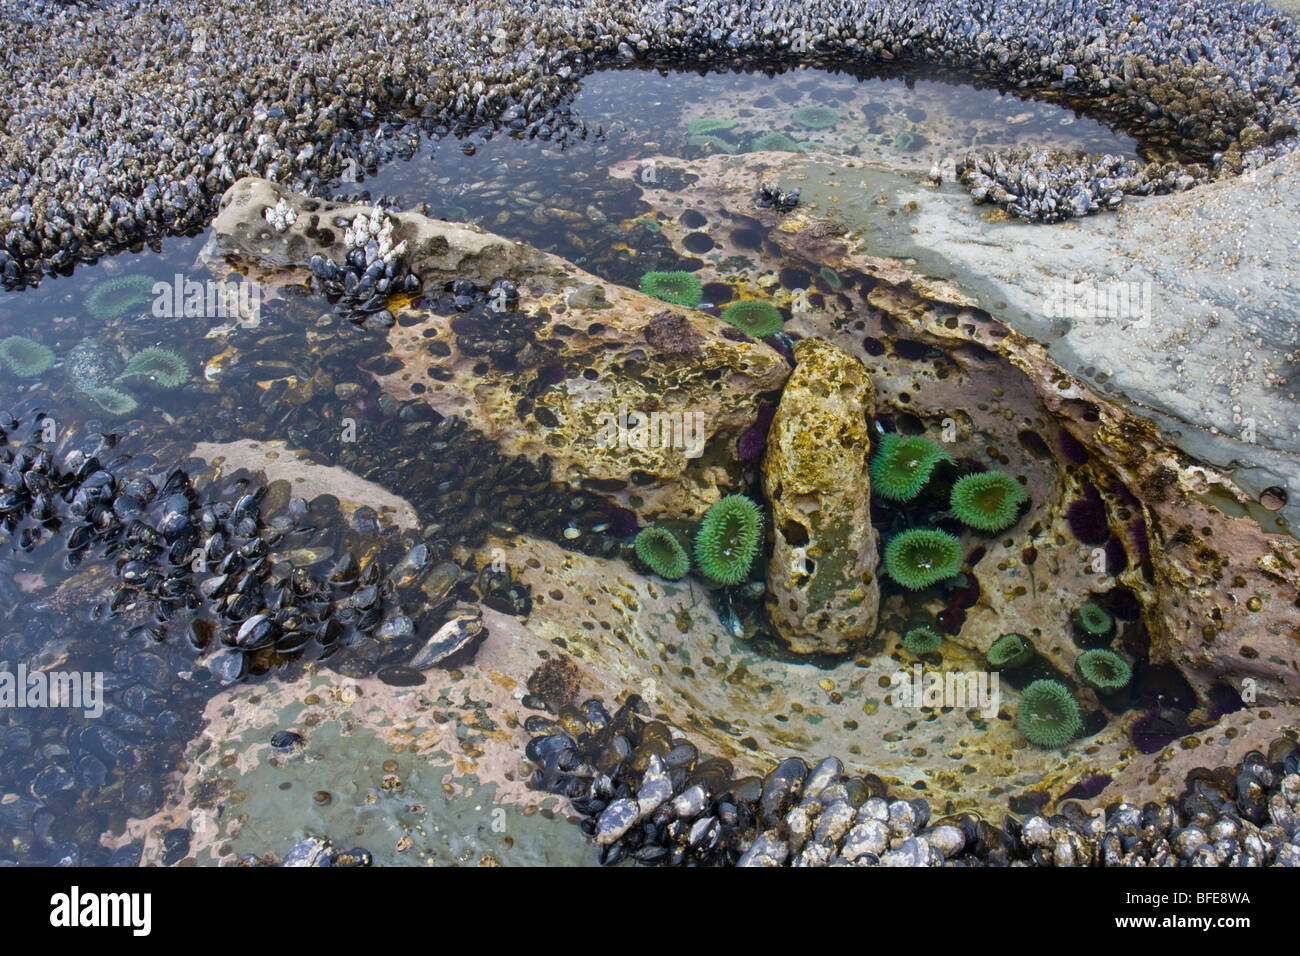 A tidal pool filled with sea anemones and mussels on the West Coast Trail on Vancouver Island, British Columbia, Canada Stock Photo